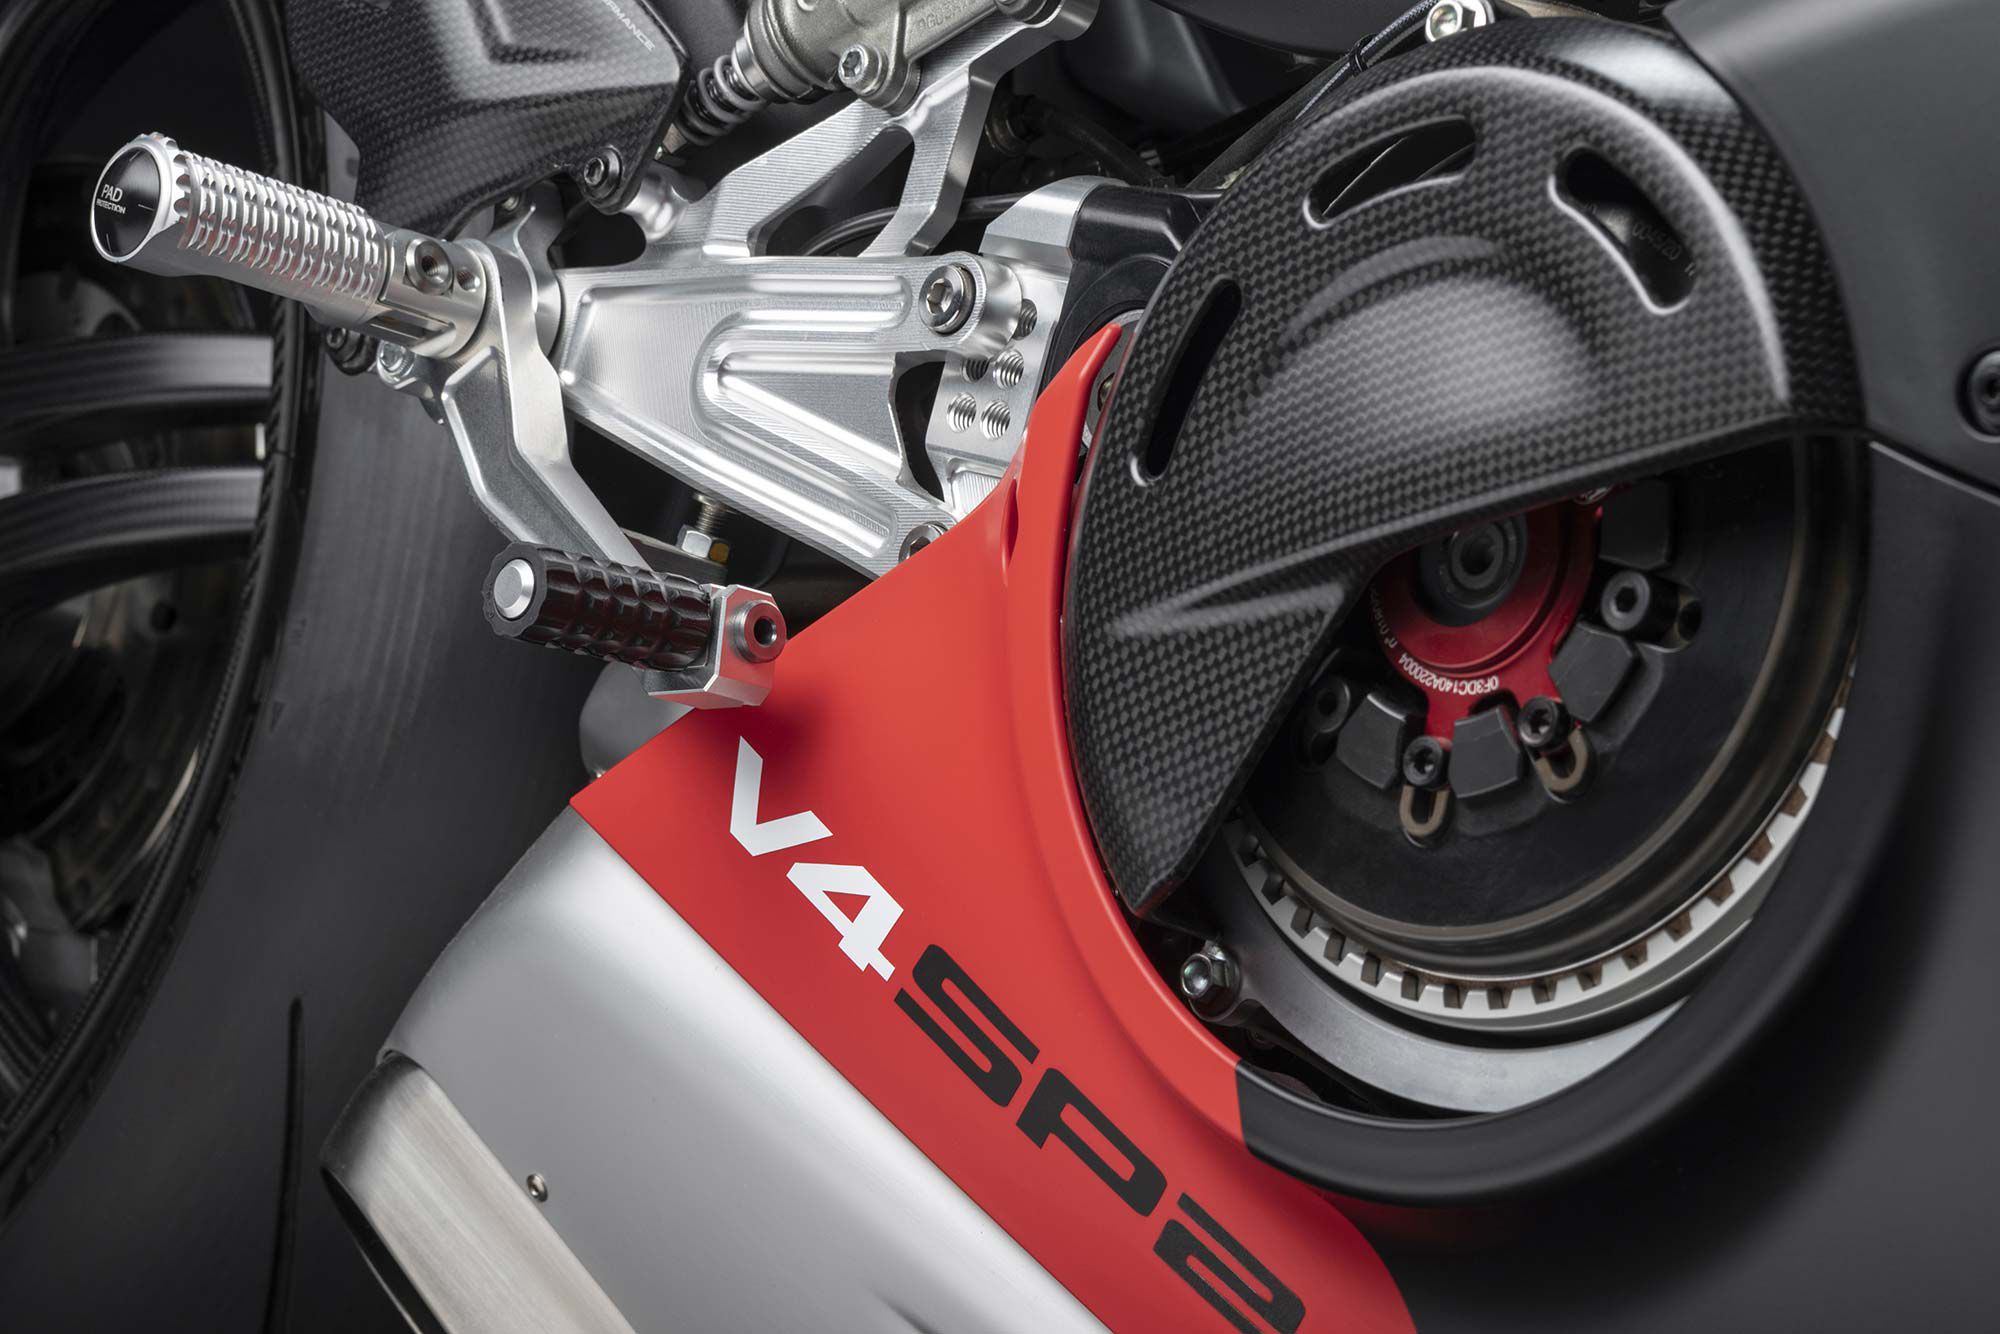 There’s an STM-EVO dry slipper clutch that sounds fabulous. The open carbon clutch cover is not Euro 5 compliant and is sold separately.